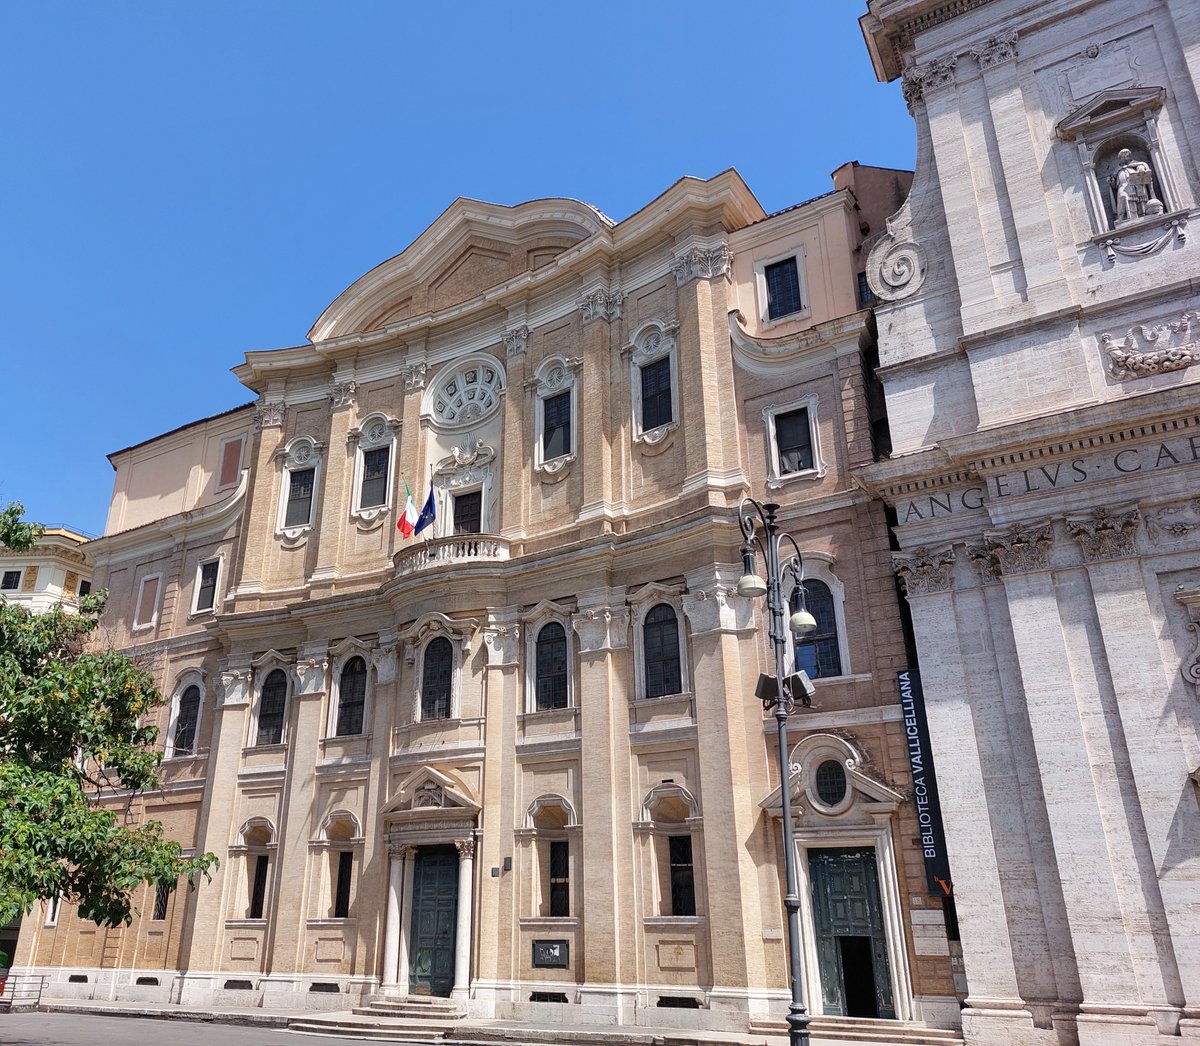 The Convent and the Oratory of the Filippini were designed by Borromini, who won in 1637 the competition for the construction of the new buildings. The Oratory's façade is one of the masterpieces of Baroque art. 👉turismoroma.it/en/places/pala… #VisitRome